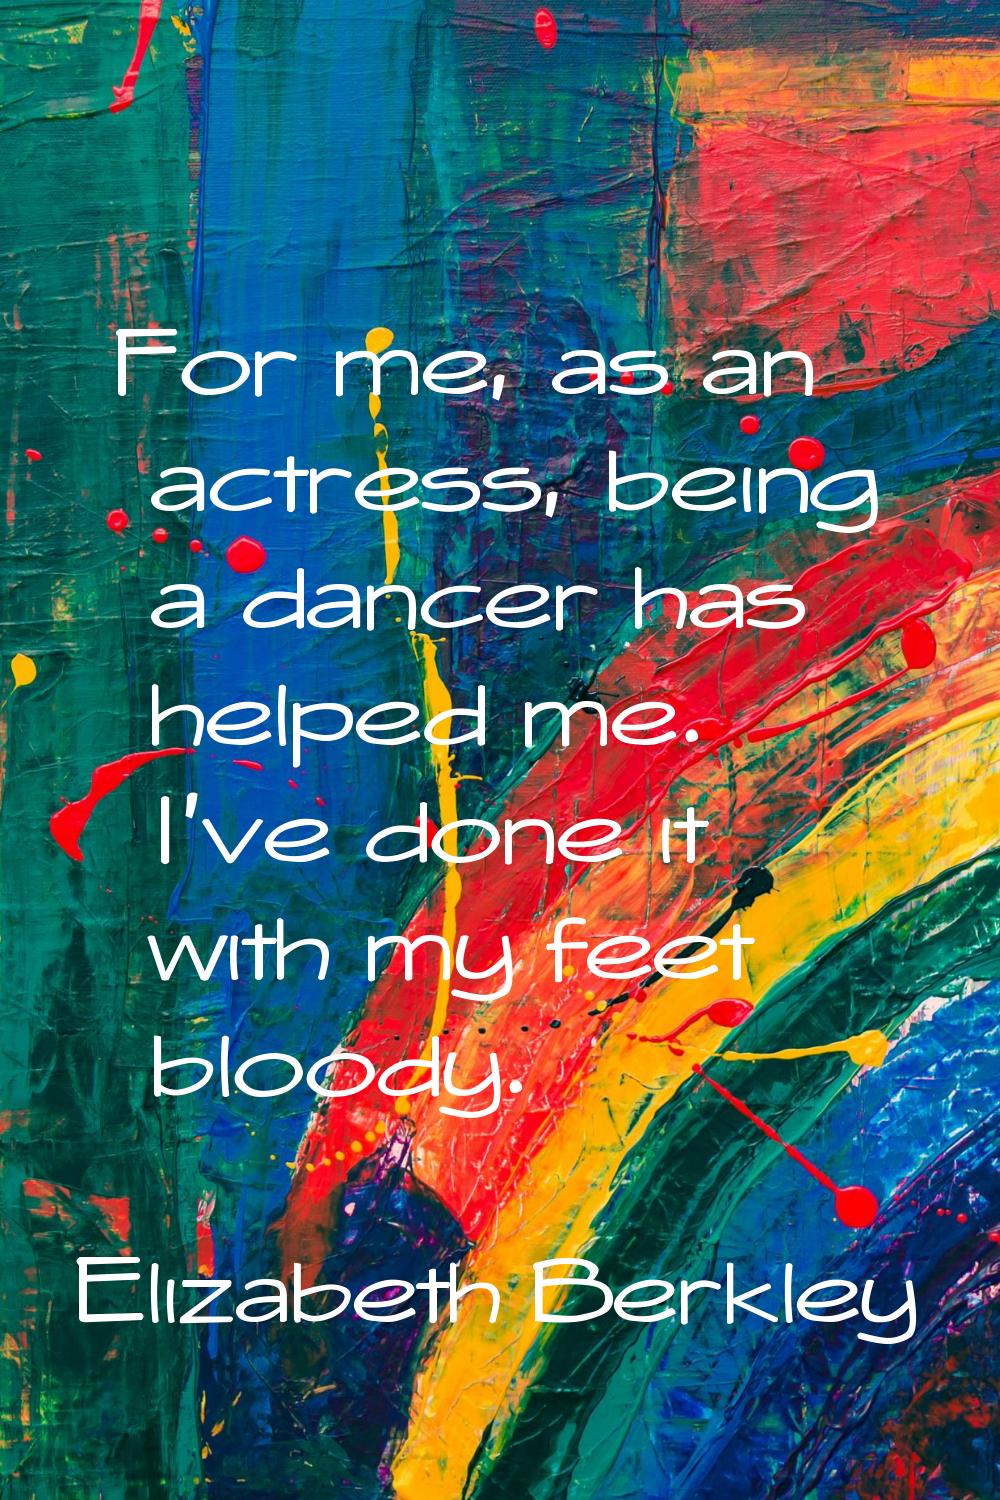 For me, as an actress, being a dancer has helped me. I've done it with my feet bloody.